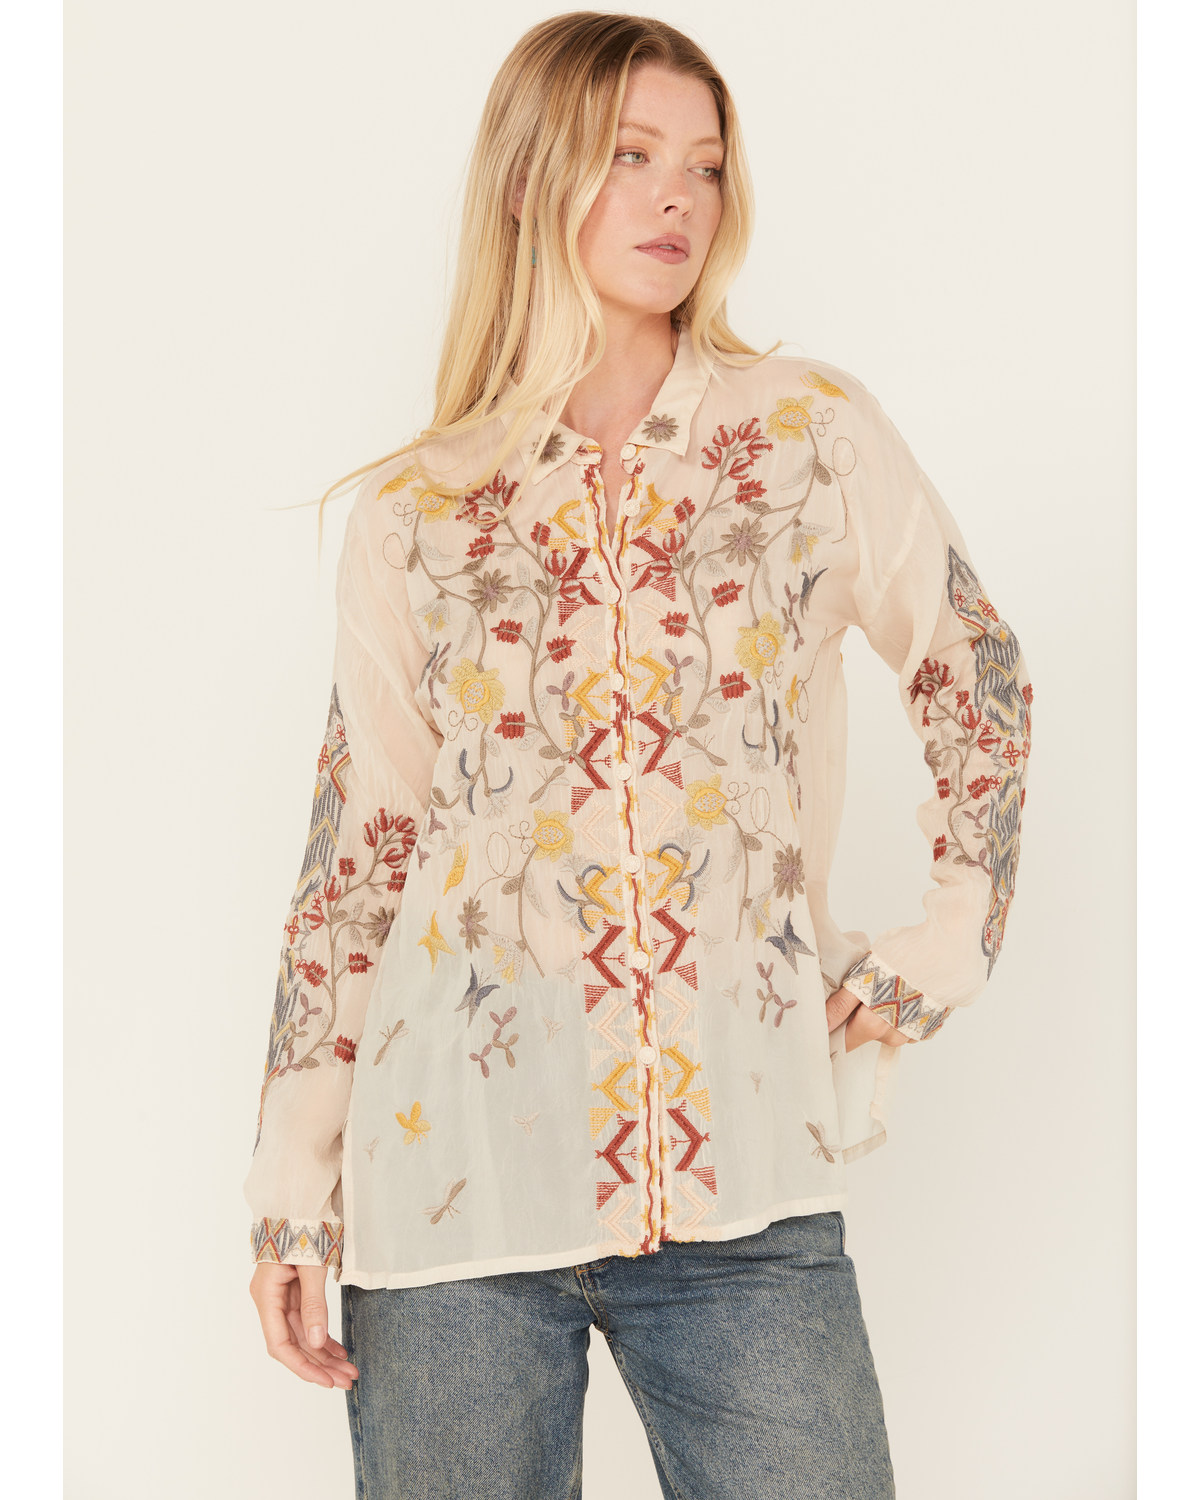 Johnny Was Women's Long Sleeve Floral Embroidered Blouse